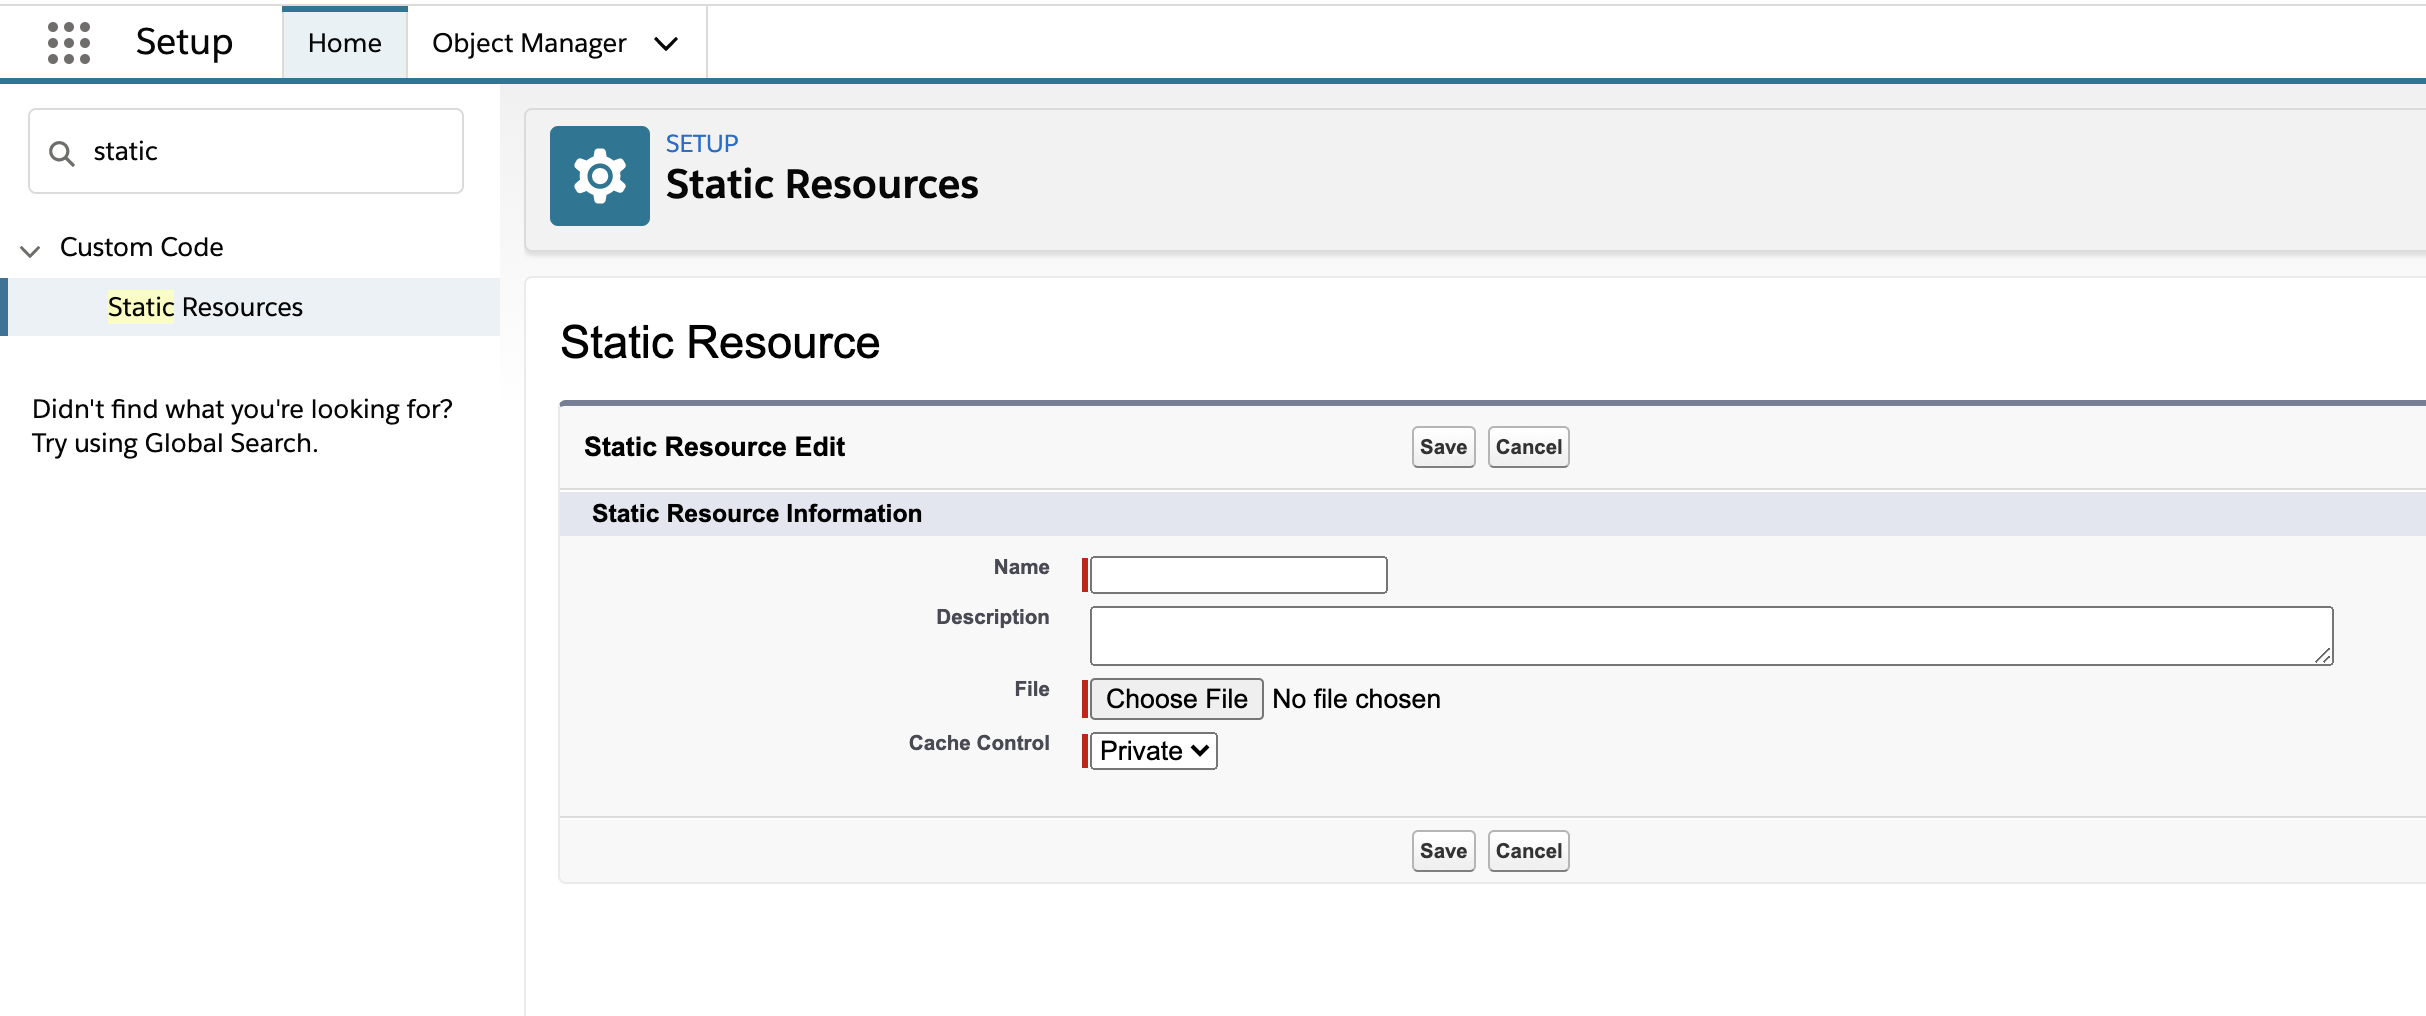 Static Resources Form Within Salesforce Setup